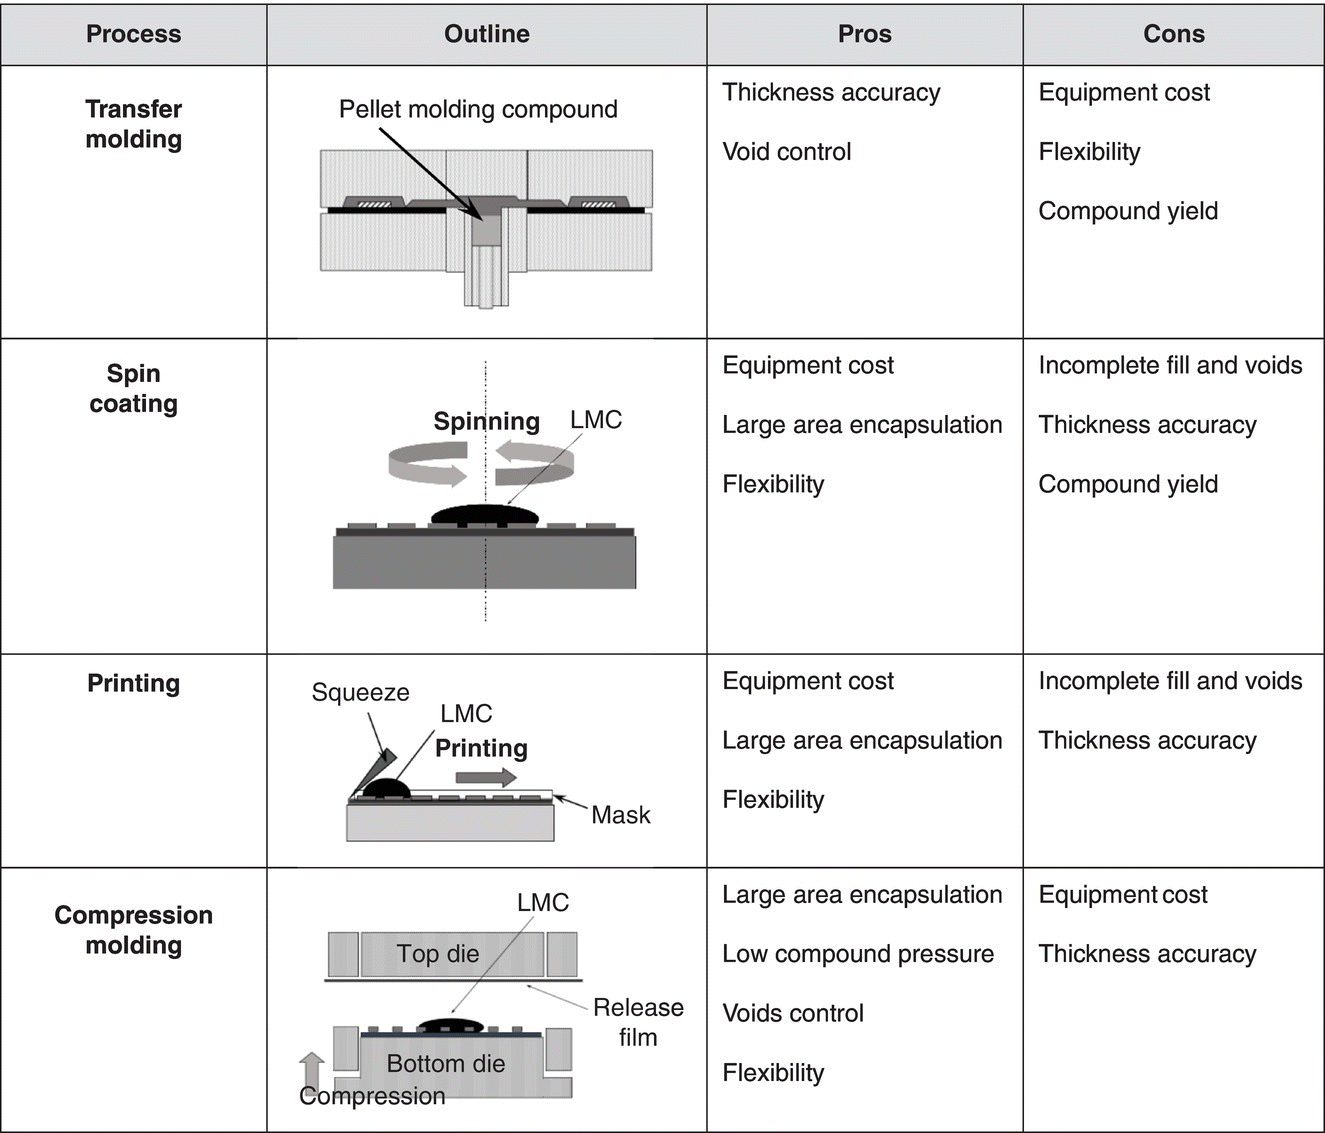 Table with columns labeled Process, Outline, Pros, and Cons and rows labeled Transfer molding having a schematic under outline with pellet molding compound indicated, Spin coating, Printing, and Compression molding.